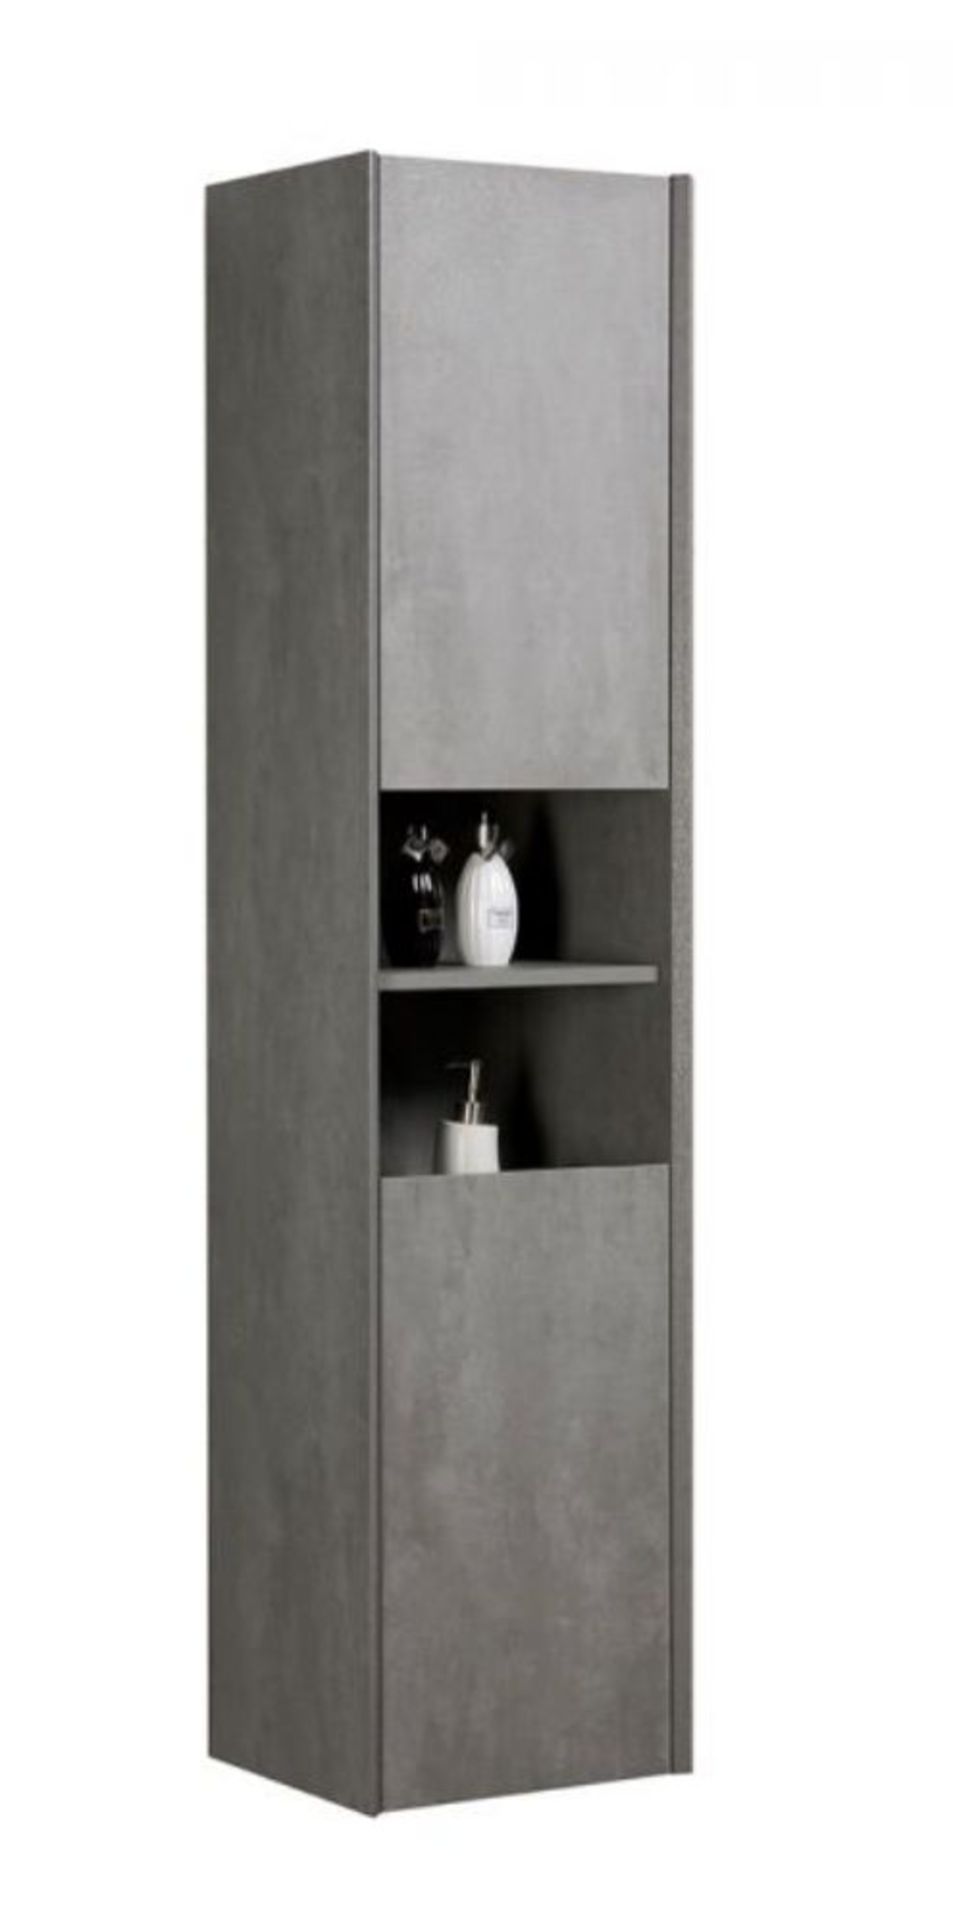 1700HX400WX350D CONCRETE GREY TALLBOY UNIT WITH TWO DOORS & CENTRAL OPEN SHELF - Image 2 of 3